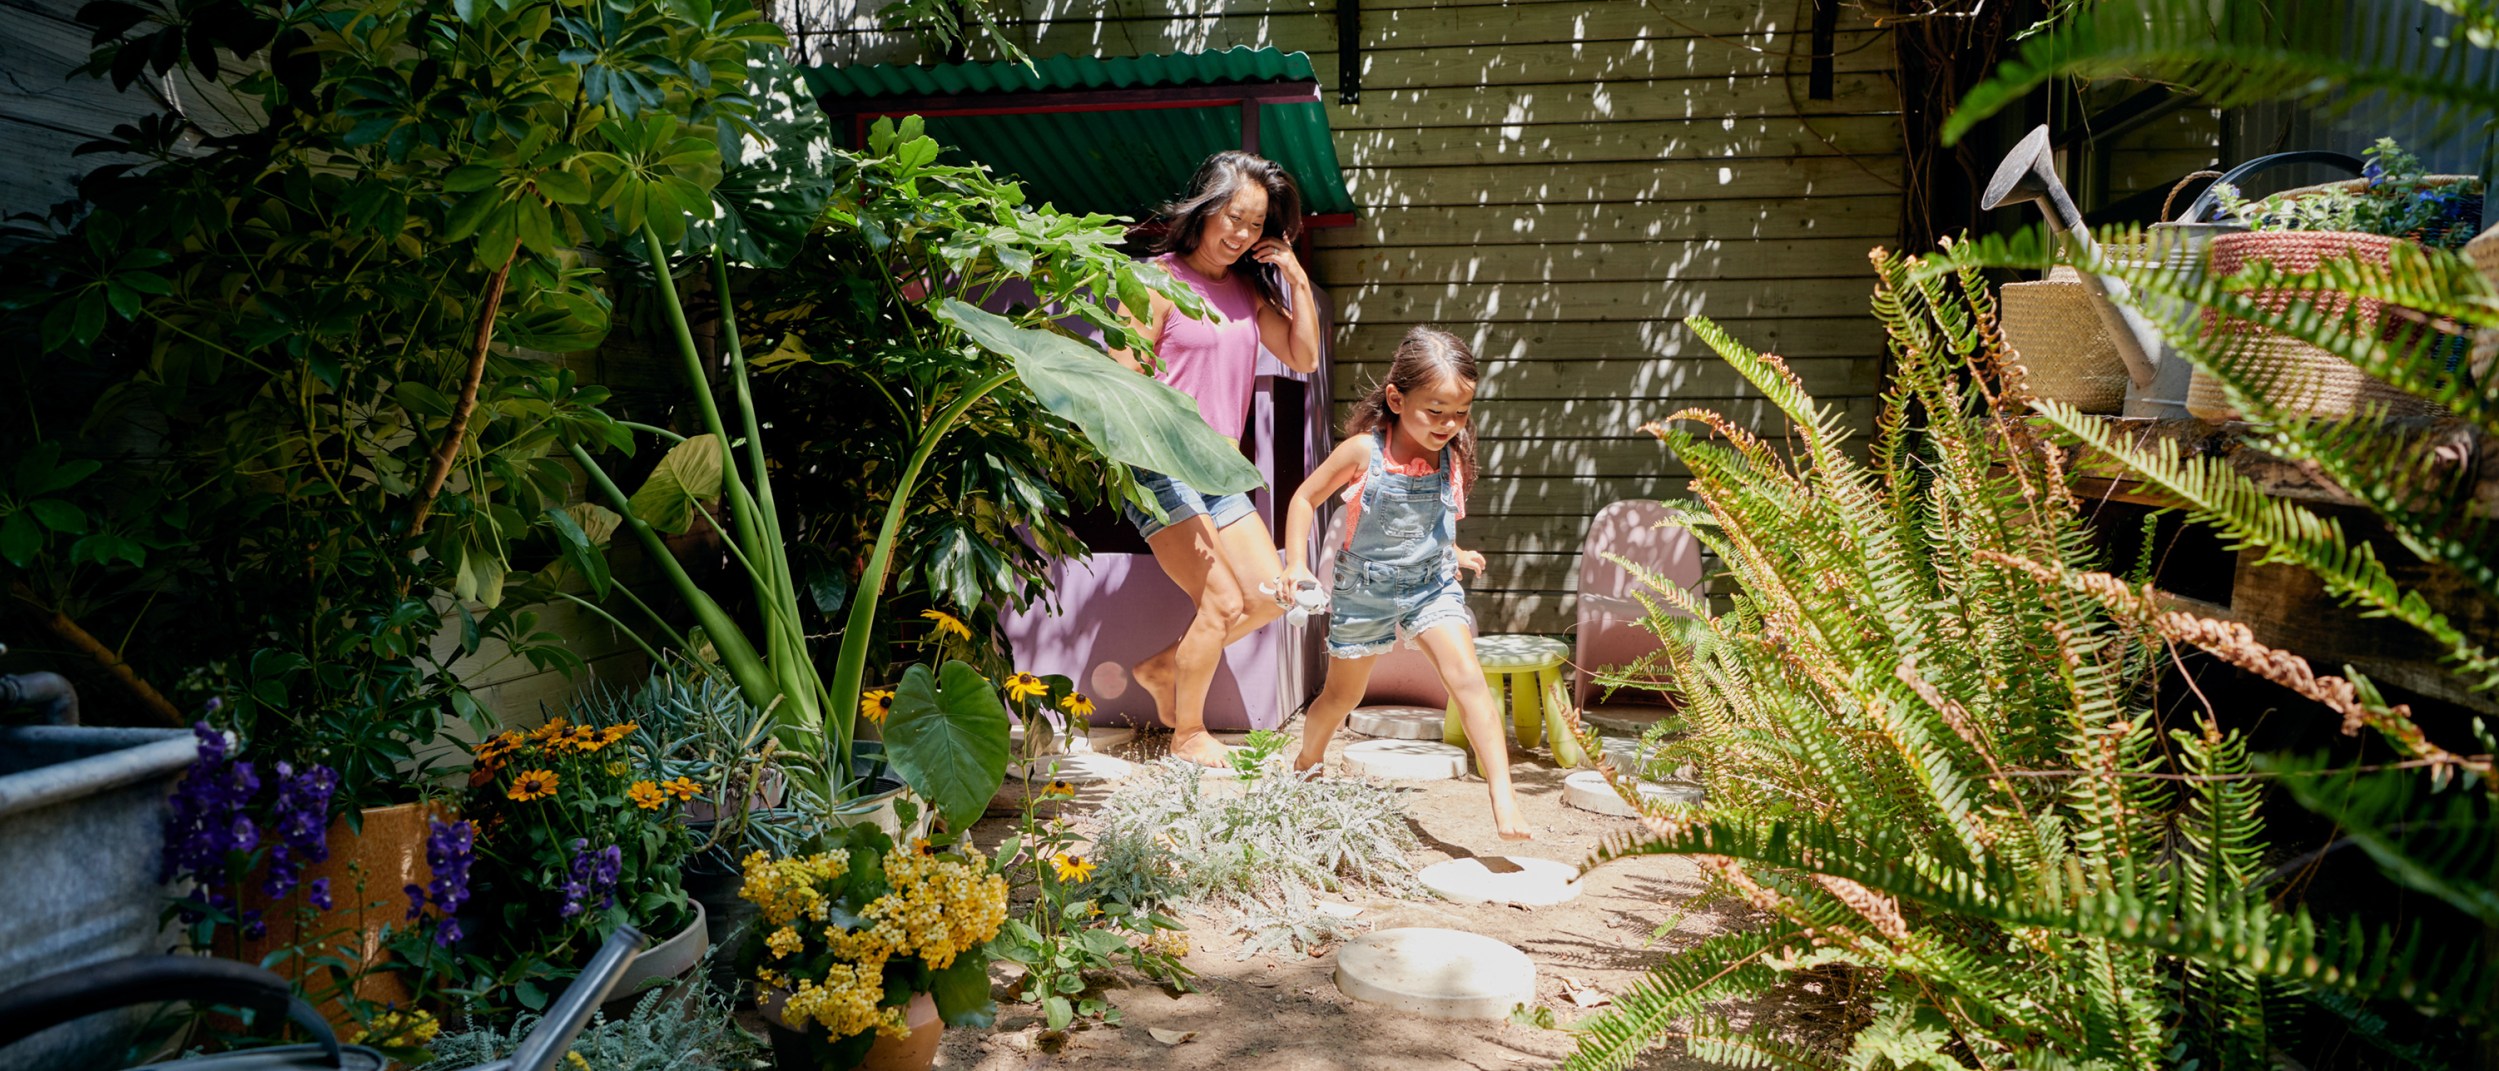 Mother and daughter running through a verdant backyard patio surrounded by flowers and greenery.